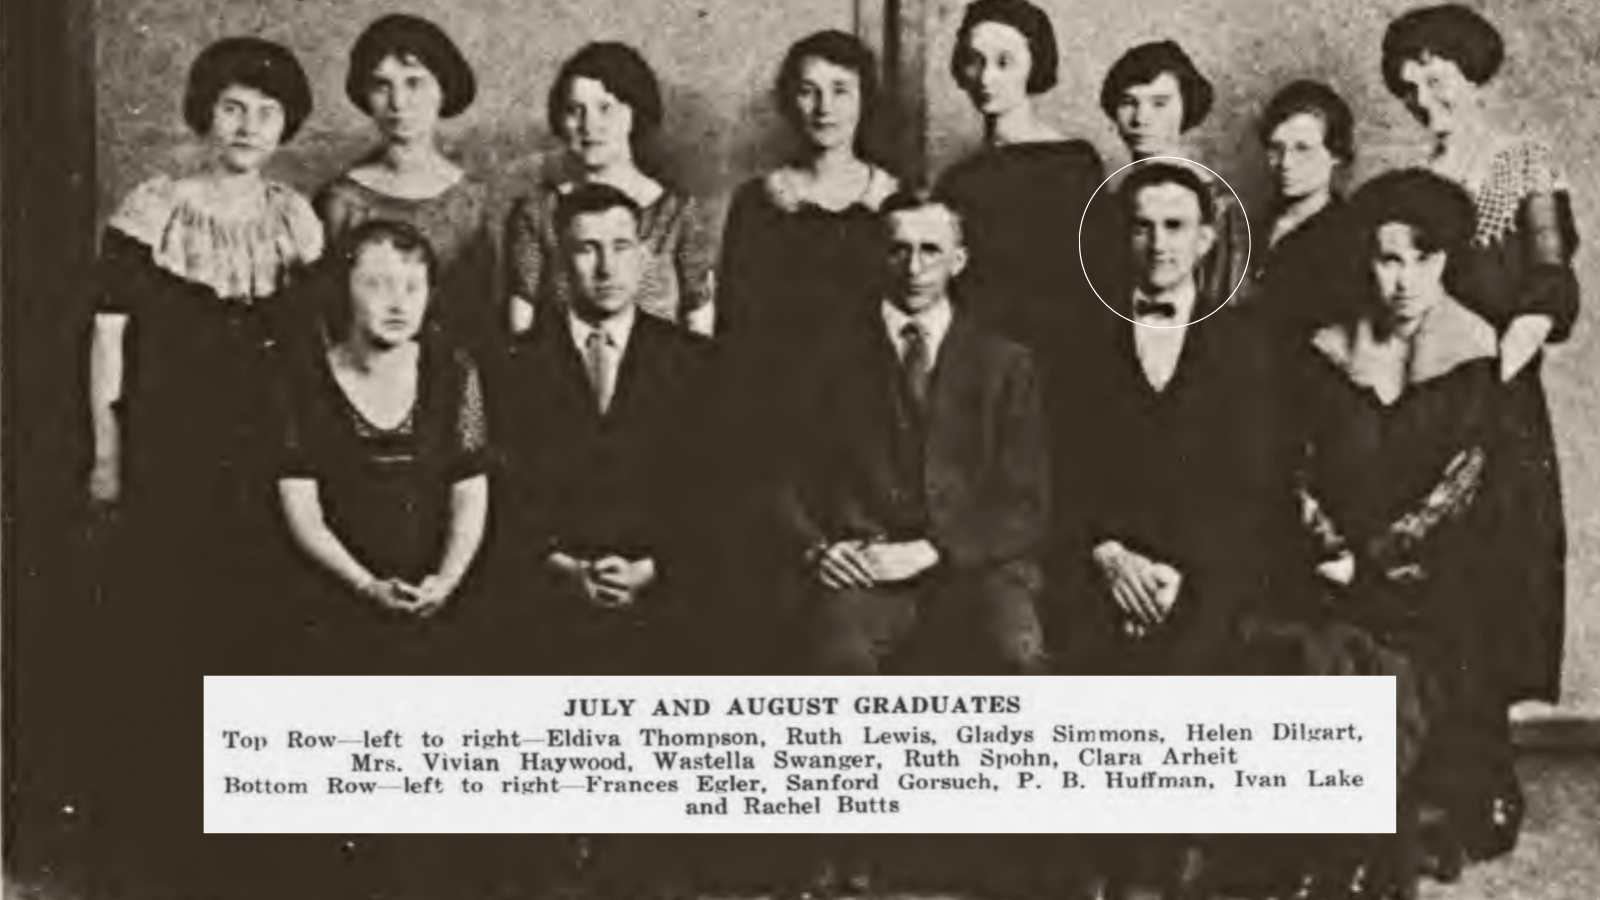  Ivan lake was in the class of July 1923 graduates, earning a Bachelor of Science in Education. 